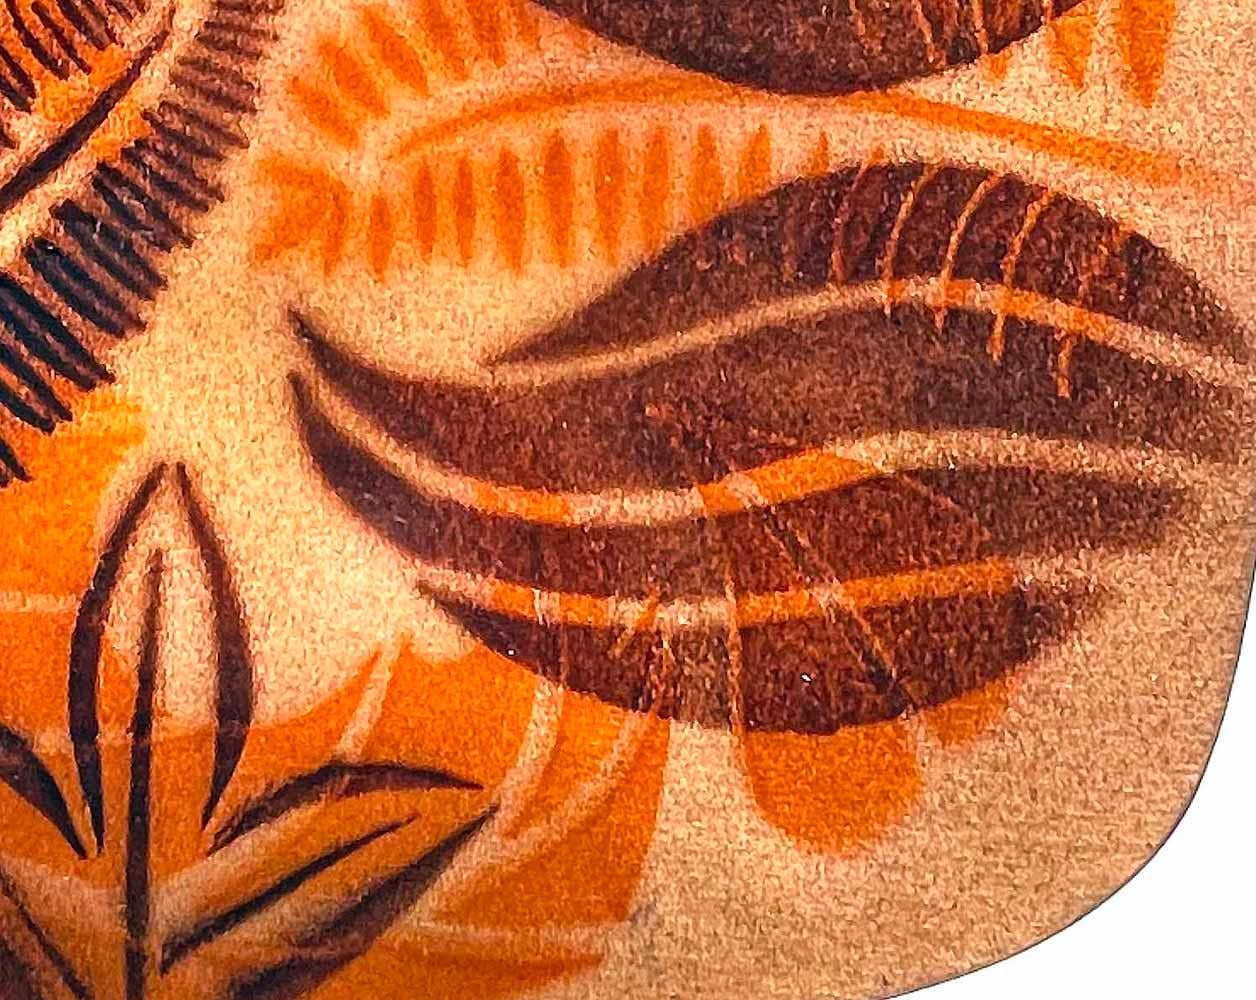 One of the largest and most striking works ever created by Annemarie Davidson, one of America's greatest enamel artists working in the 1950s and 60s, this low bowl depicts an overlay of leaves and ferns in a rich array of coppery, bronze and ruddy